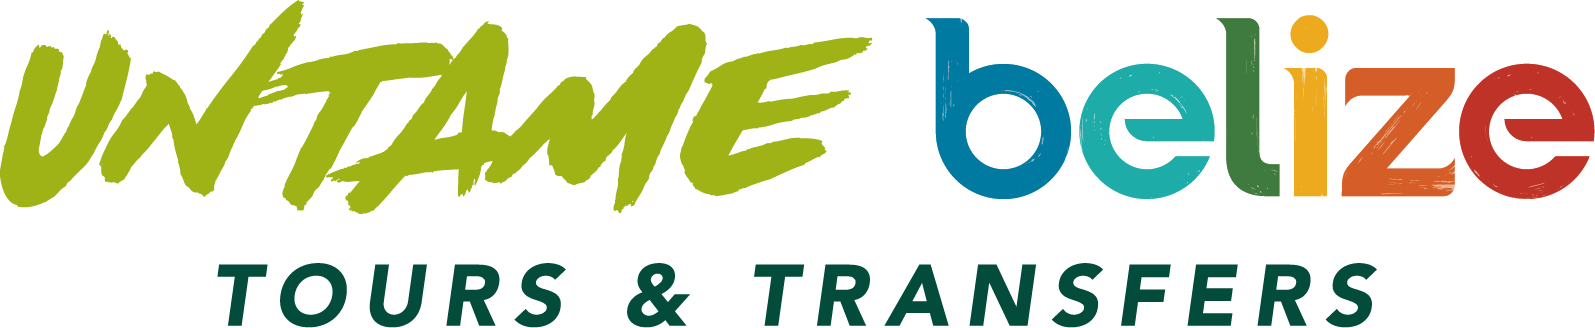 Untame Belize Tours and Transfers Logo colored